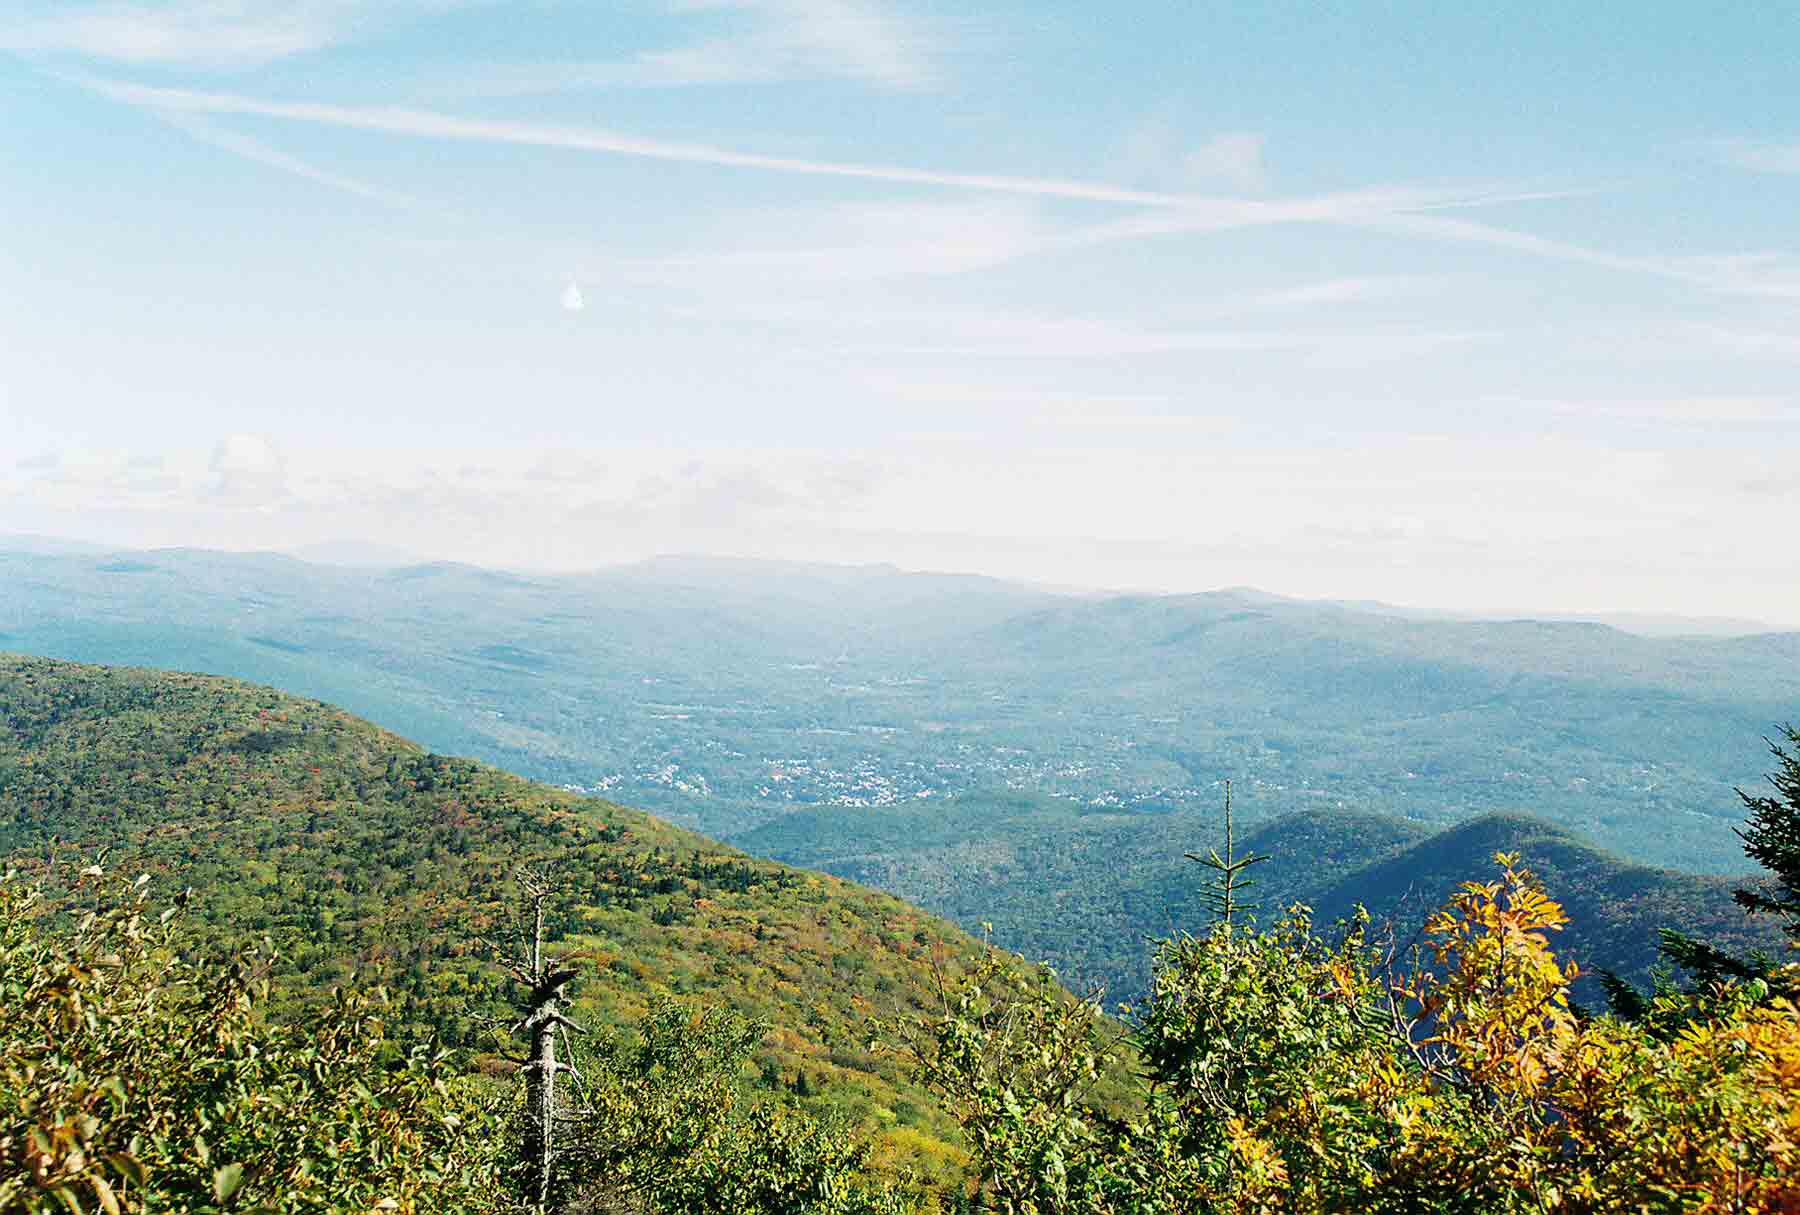 mm 6.3 - View to the north from the summit of Mt. Greylock. The built up area visible is North Adams/Williamstown. Glastenbury Mountain can be seen in the distance in the center of the picture. Stratton Mountain is also visible (barely) to the left of center. The AT crosses both of these peaks.  Courtesy dlcul@conncoll.edu